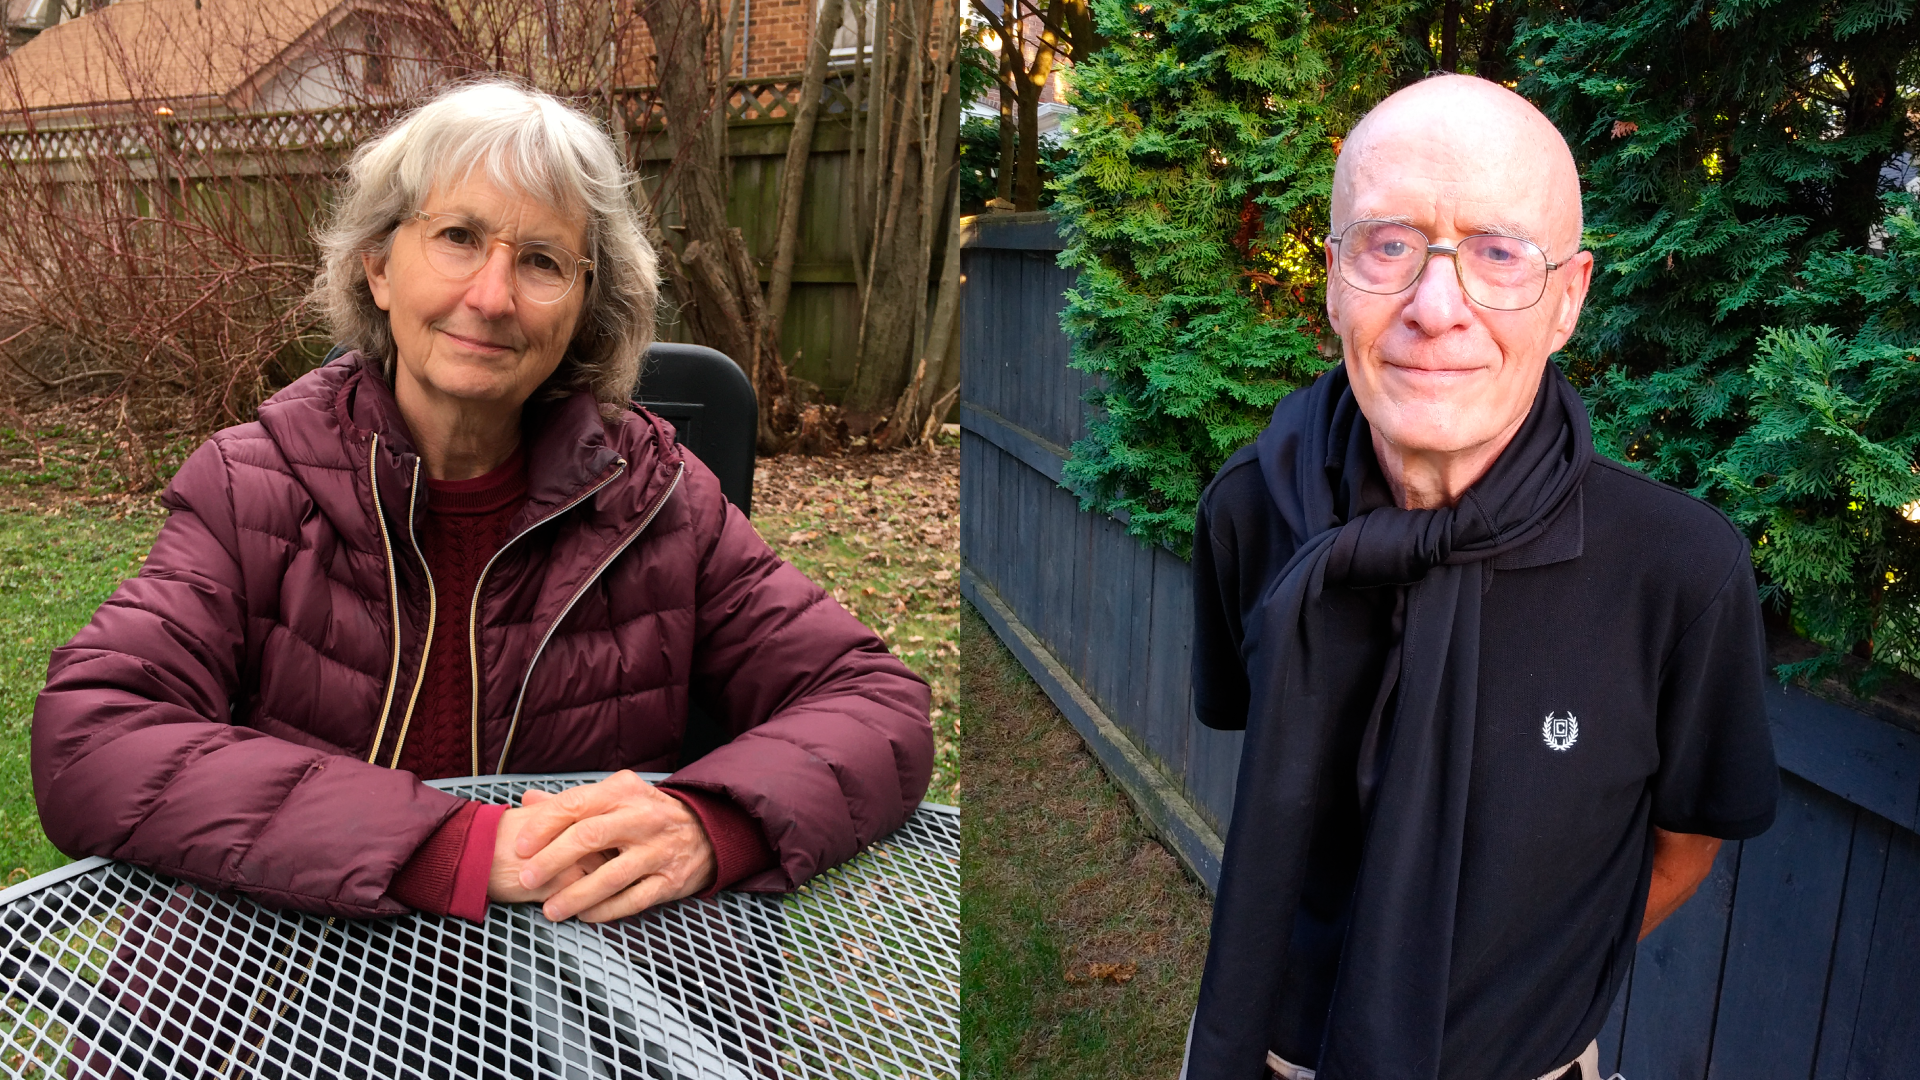 Author photos: Sue Blaustein on left, DeWitt Clinton on left. Both are in exterior spaces, Sue during a midwest fall, DeWitt with green foliage in background.